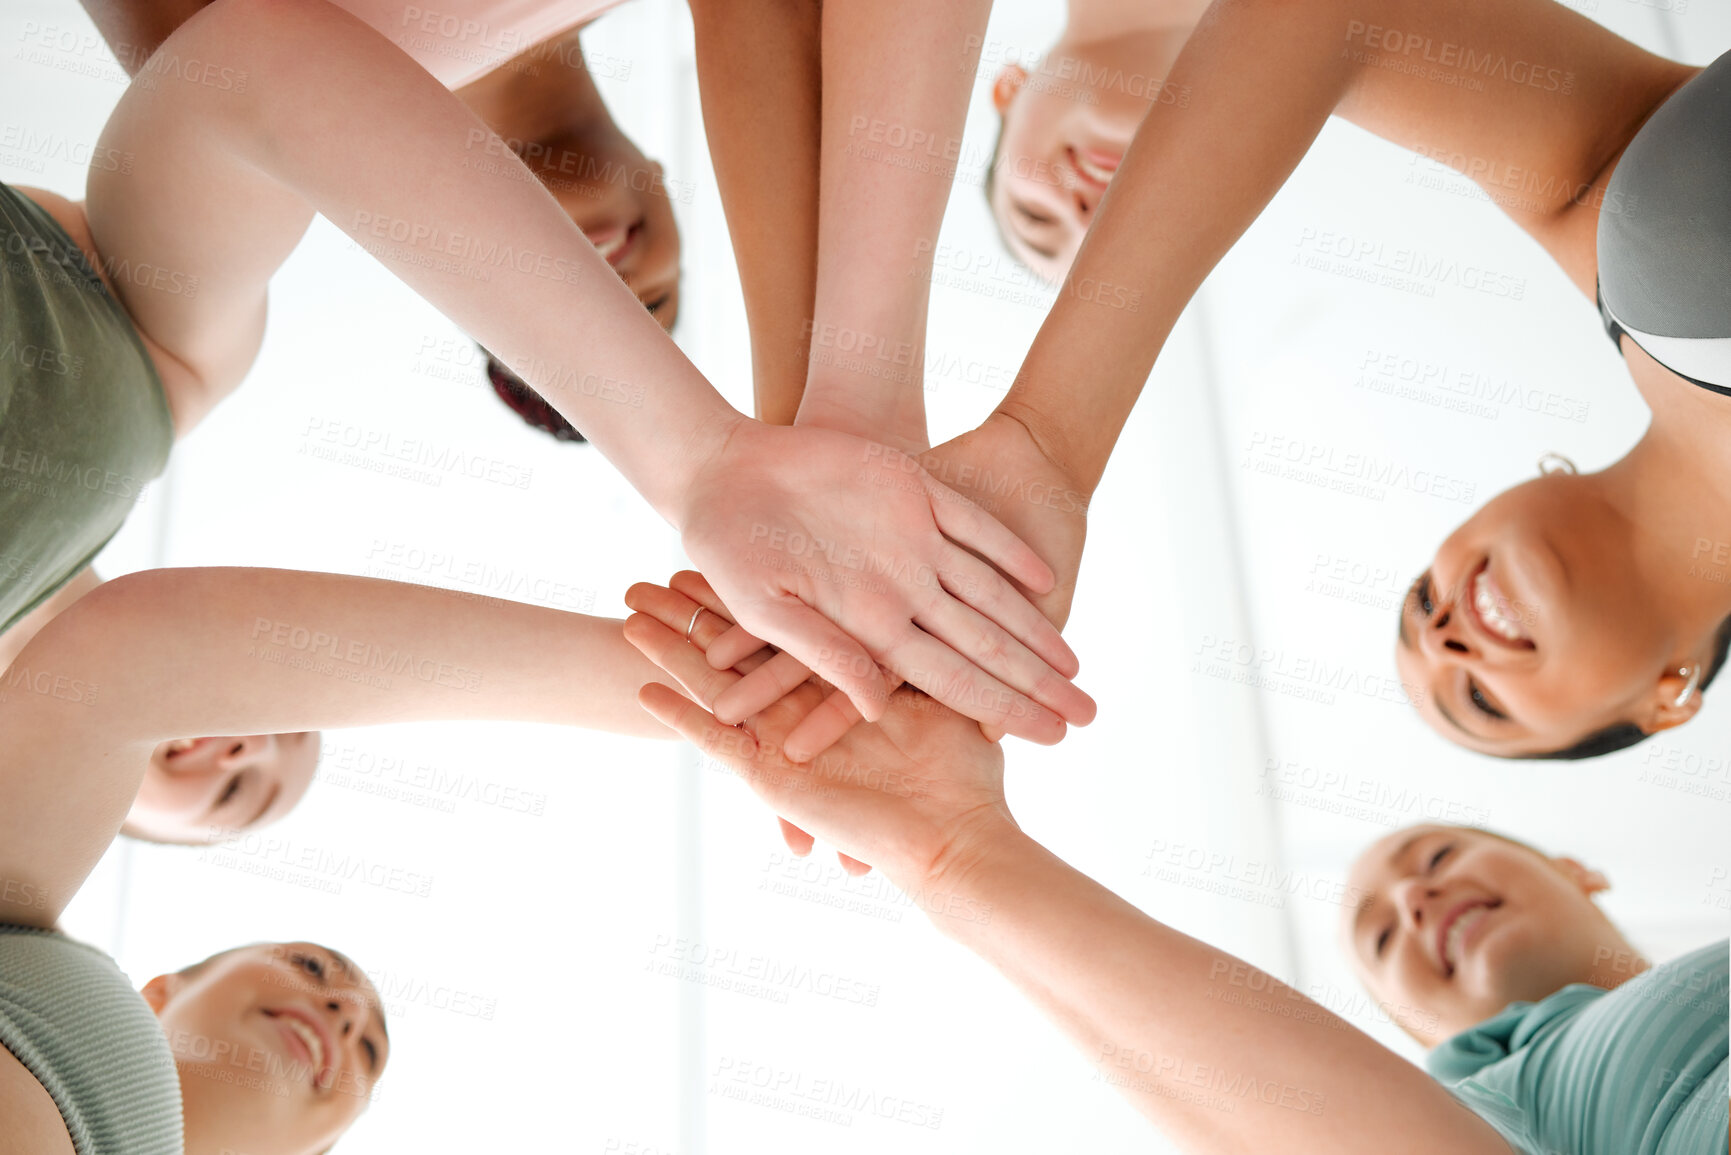 Buy stock photo Shot of a group of fit young women joining their hands in a huddle